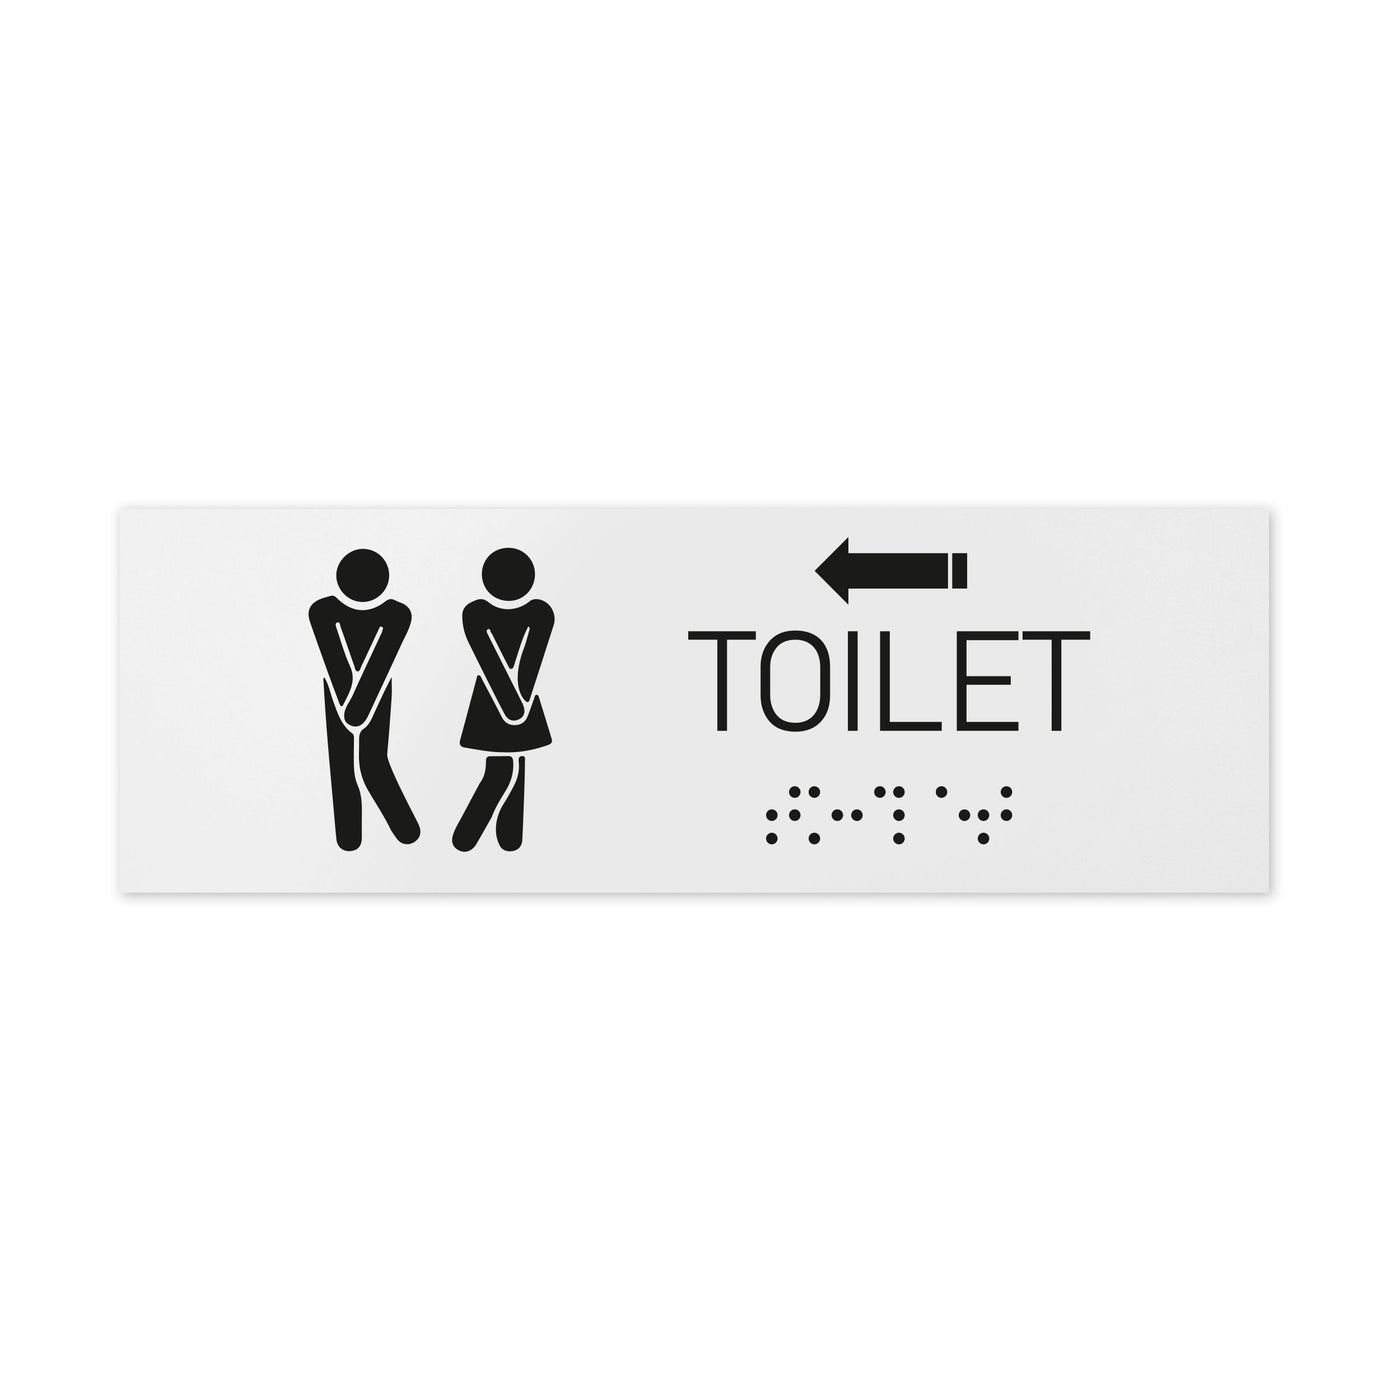 Bathroom Signs - Men & Women Toilet Signs With Braille - Milk Acrylic